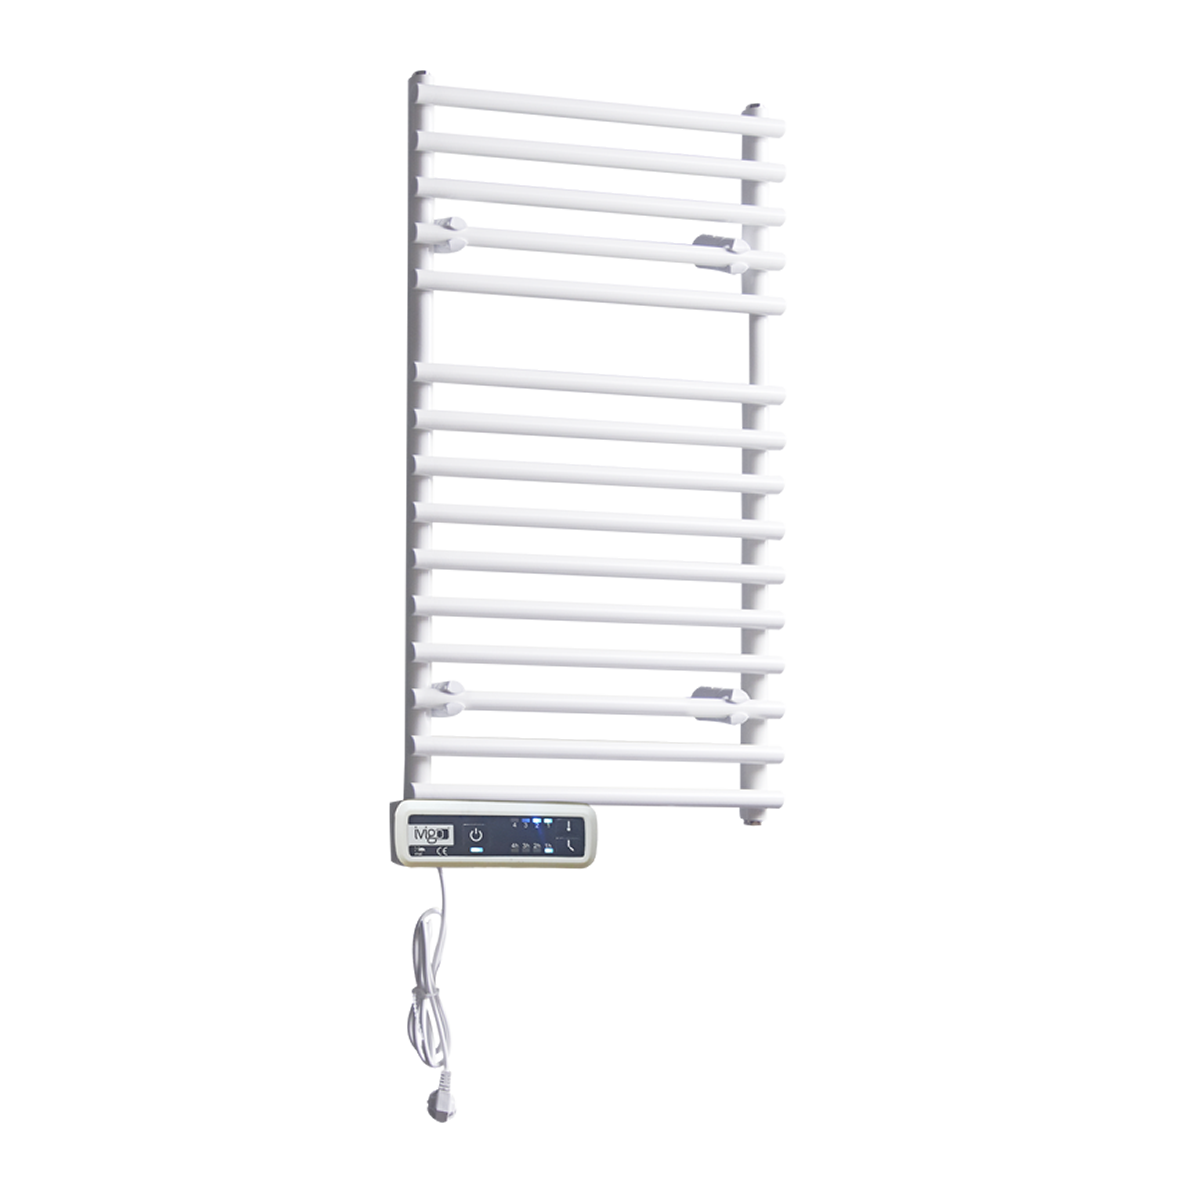 Greened House Electric Chrome 600W x 1000H Curved Towel Rail Timer and Room Thermostat Bathroom Towel Rails 